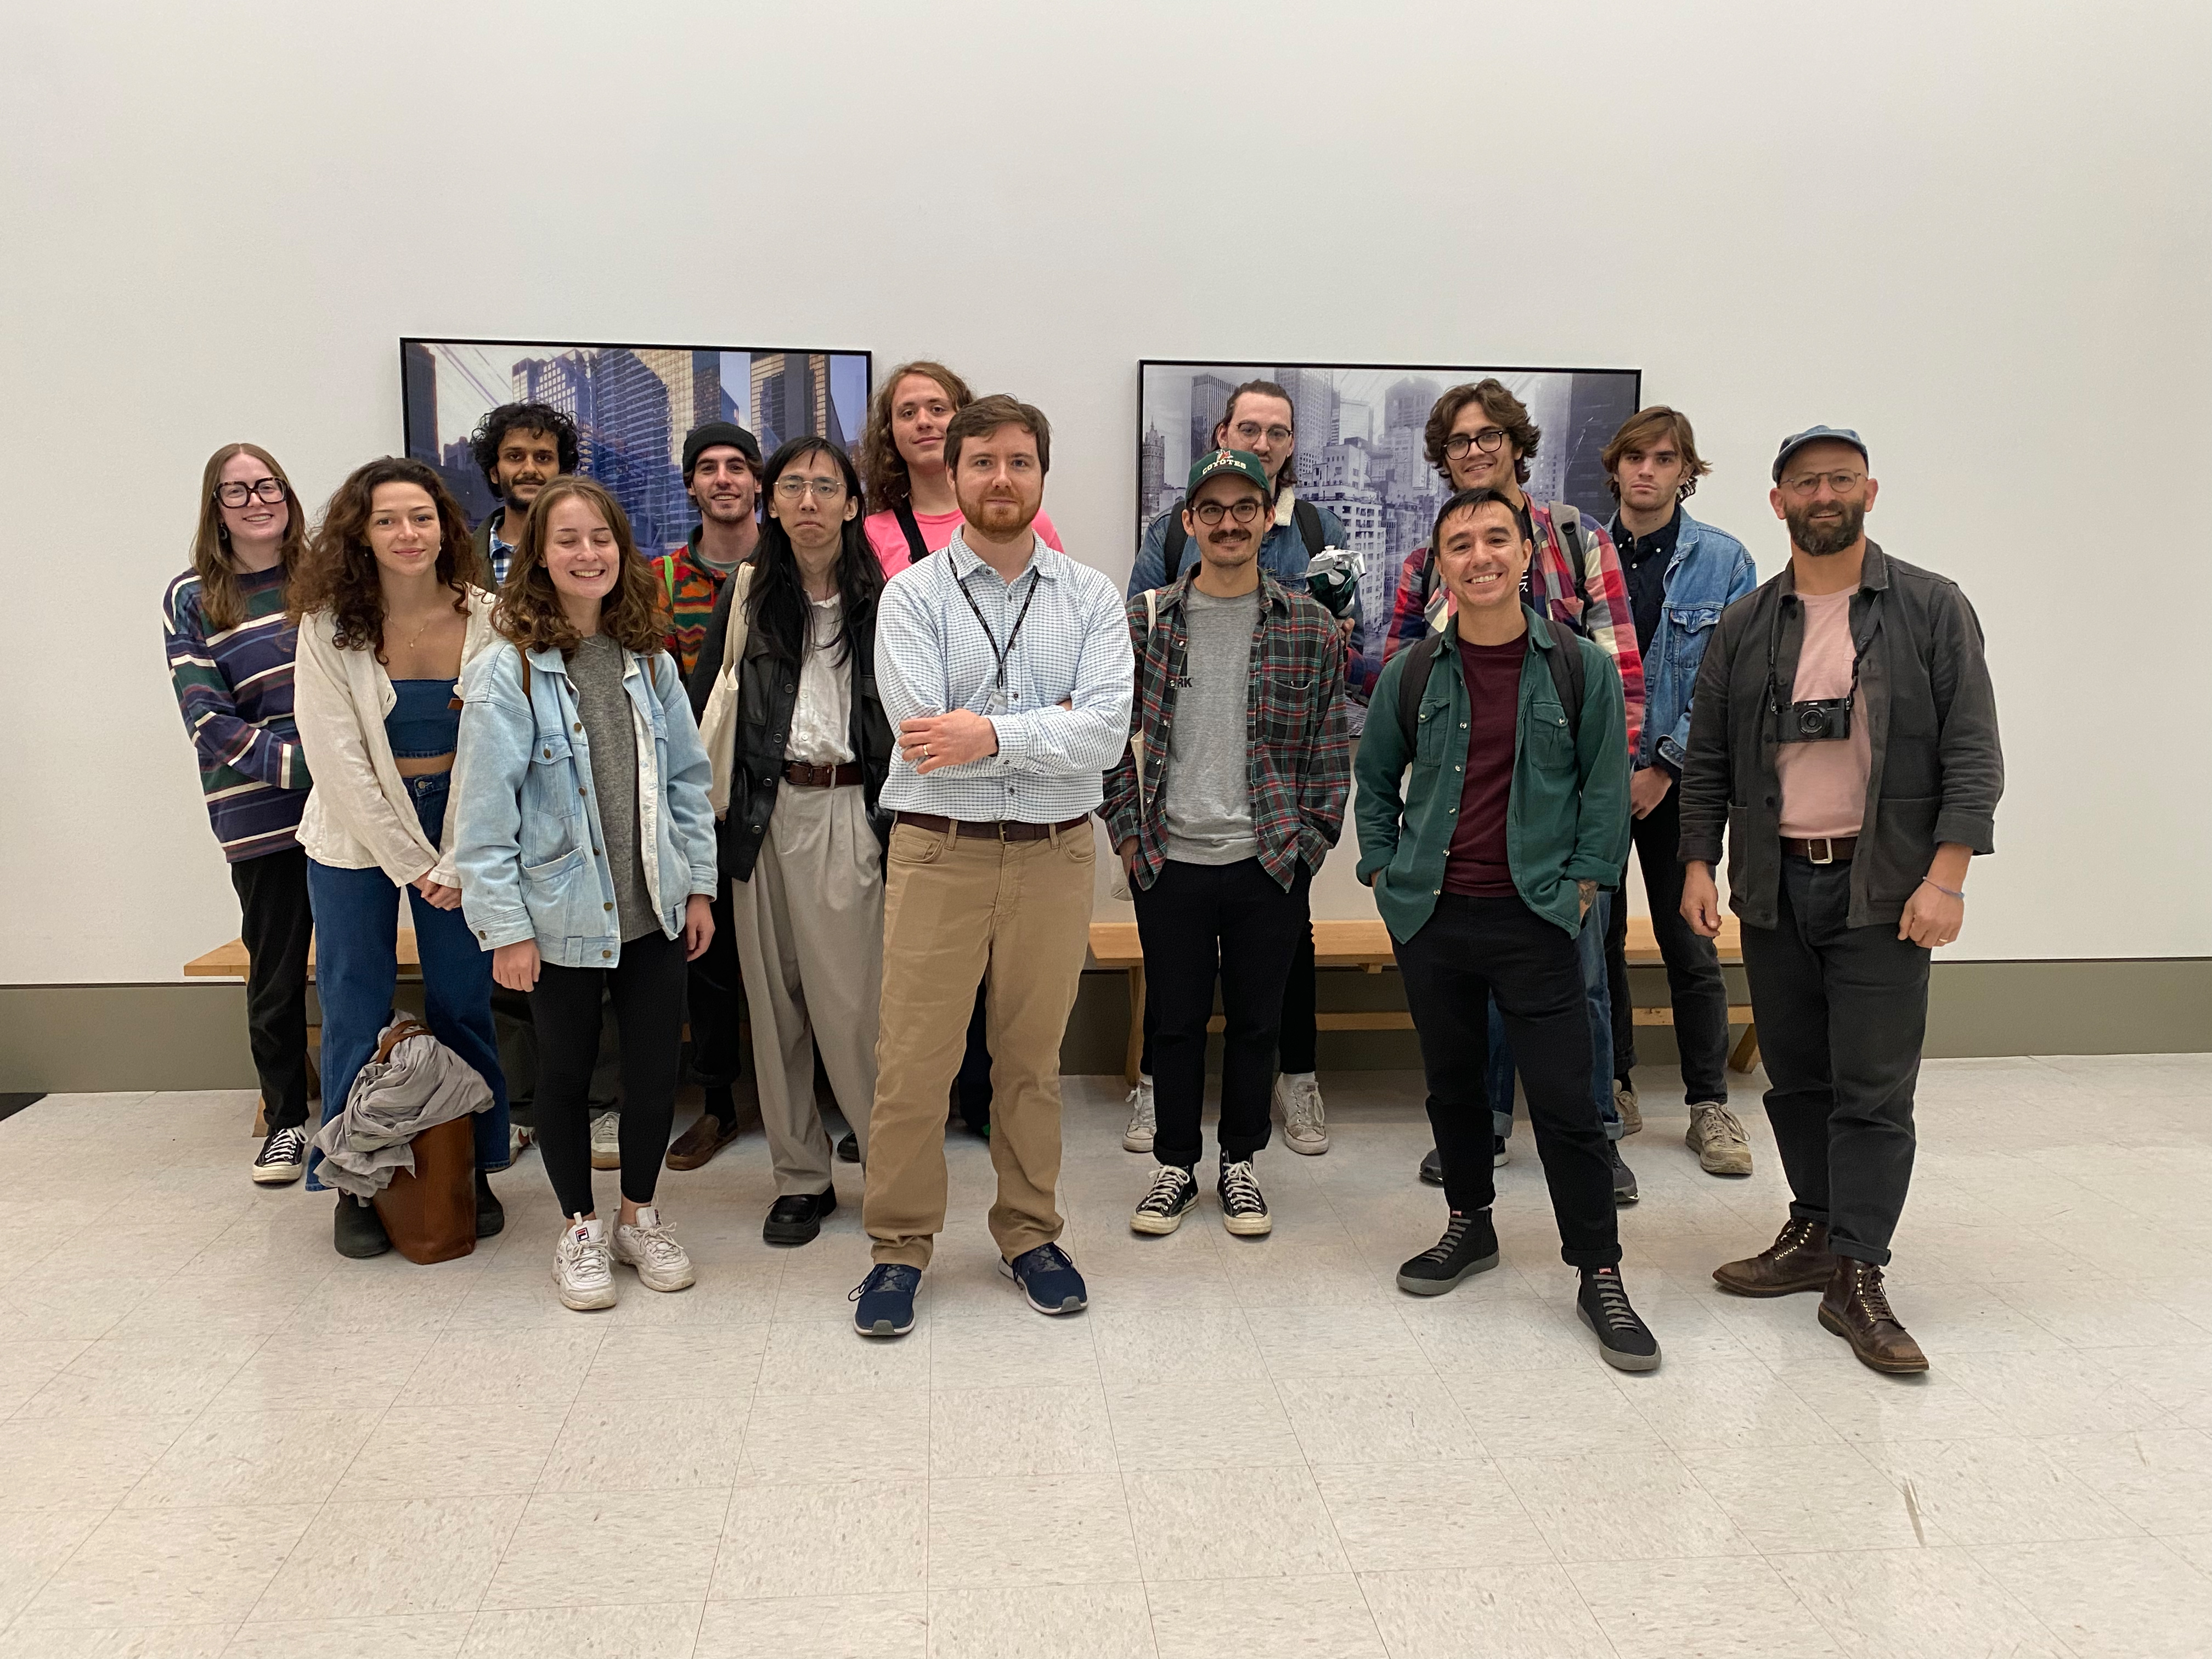 A group photo with RIT photography students and faculty and Denis Doorly, director of MoMA photography and art documentation.